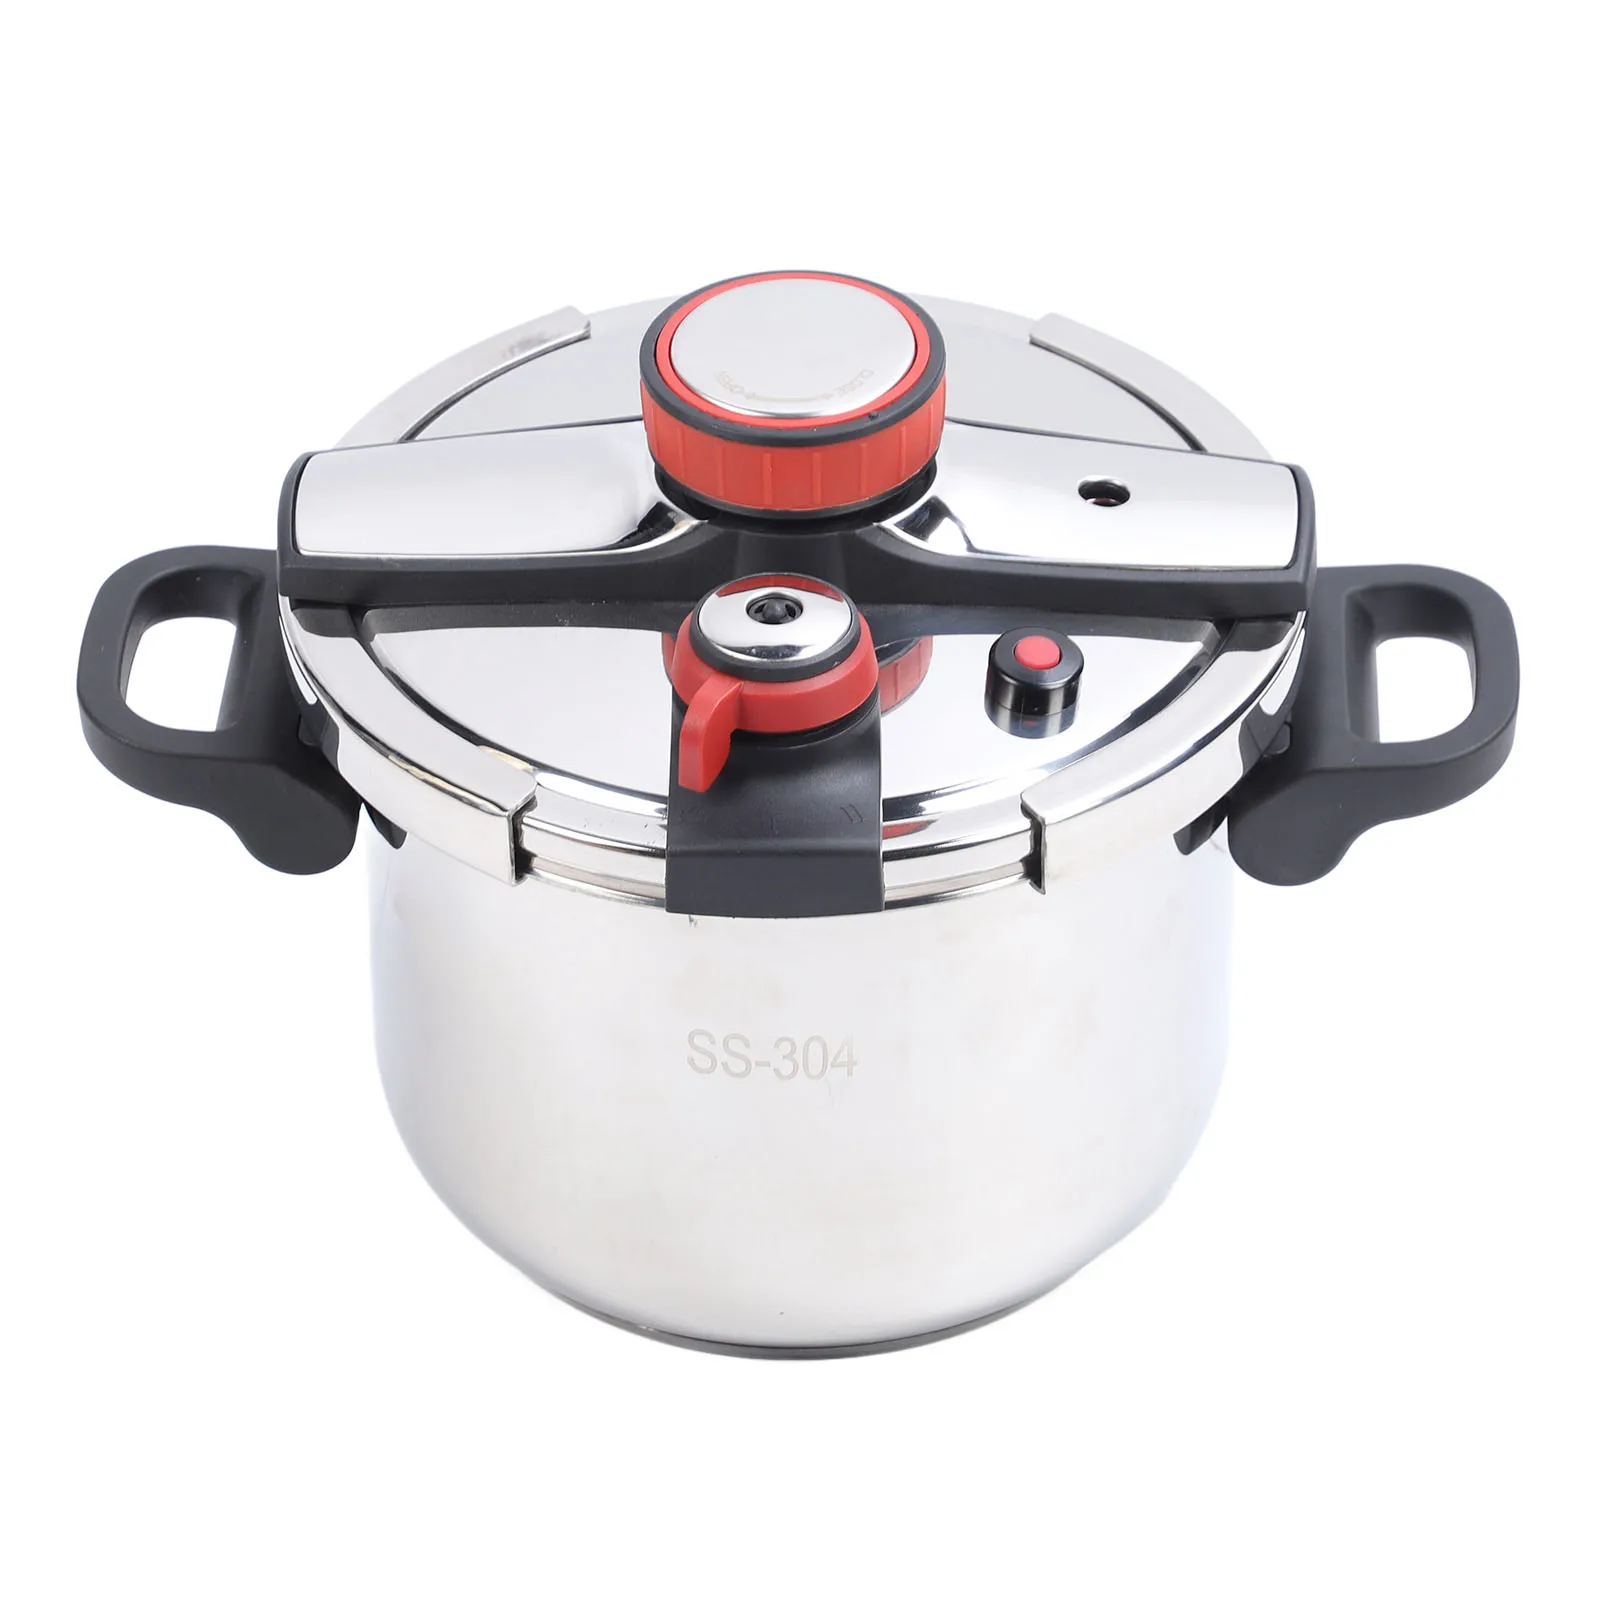 Pressure Cooker Fast Boiling Intelligent Control Pressure Cooker Pot 304 Stainless Steel Foldable Handle 100kpa for Gas Stove